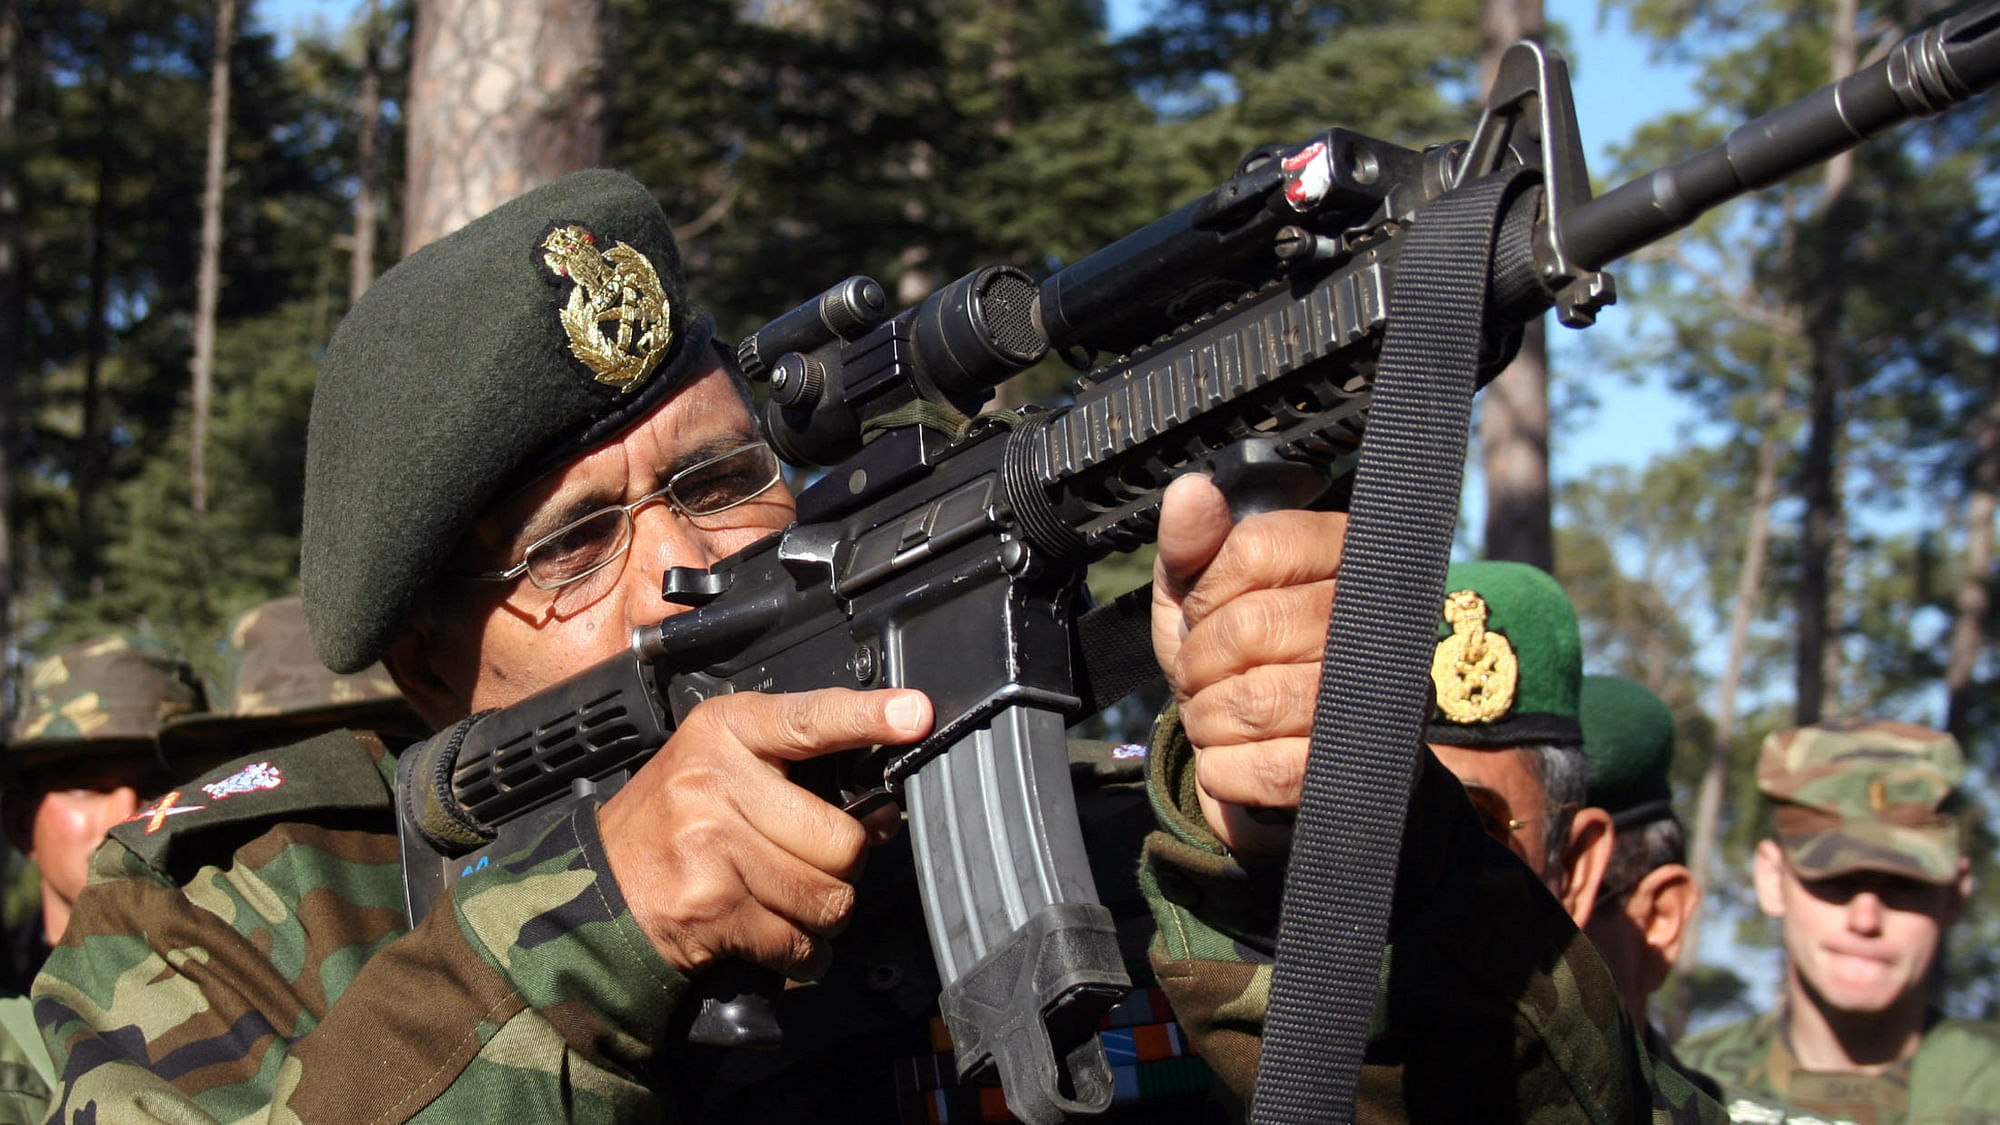 An Indian army officer inspects a US rifle during Indo-US joint exercise in Chaubattia, in the northern Indian state of Uttaranchal, on 26 January 2006. (Photo: Reuters)